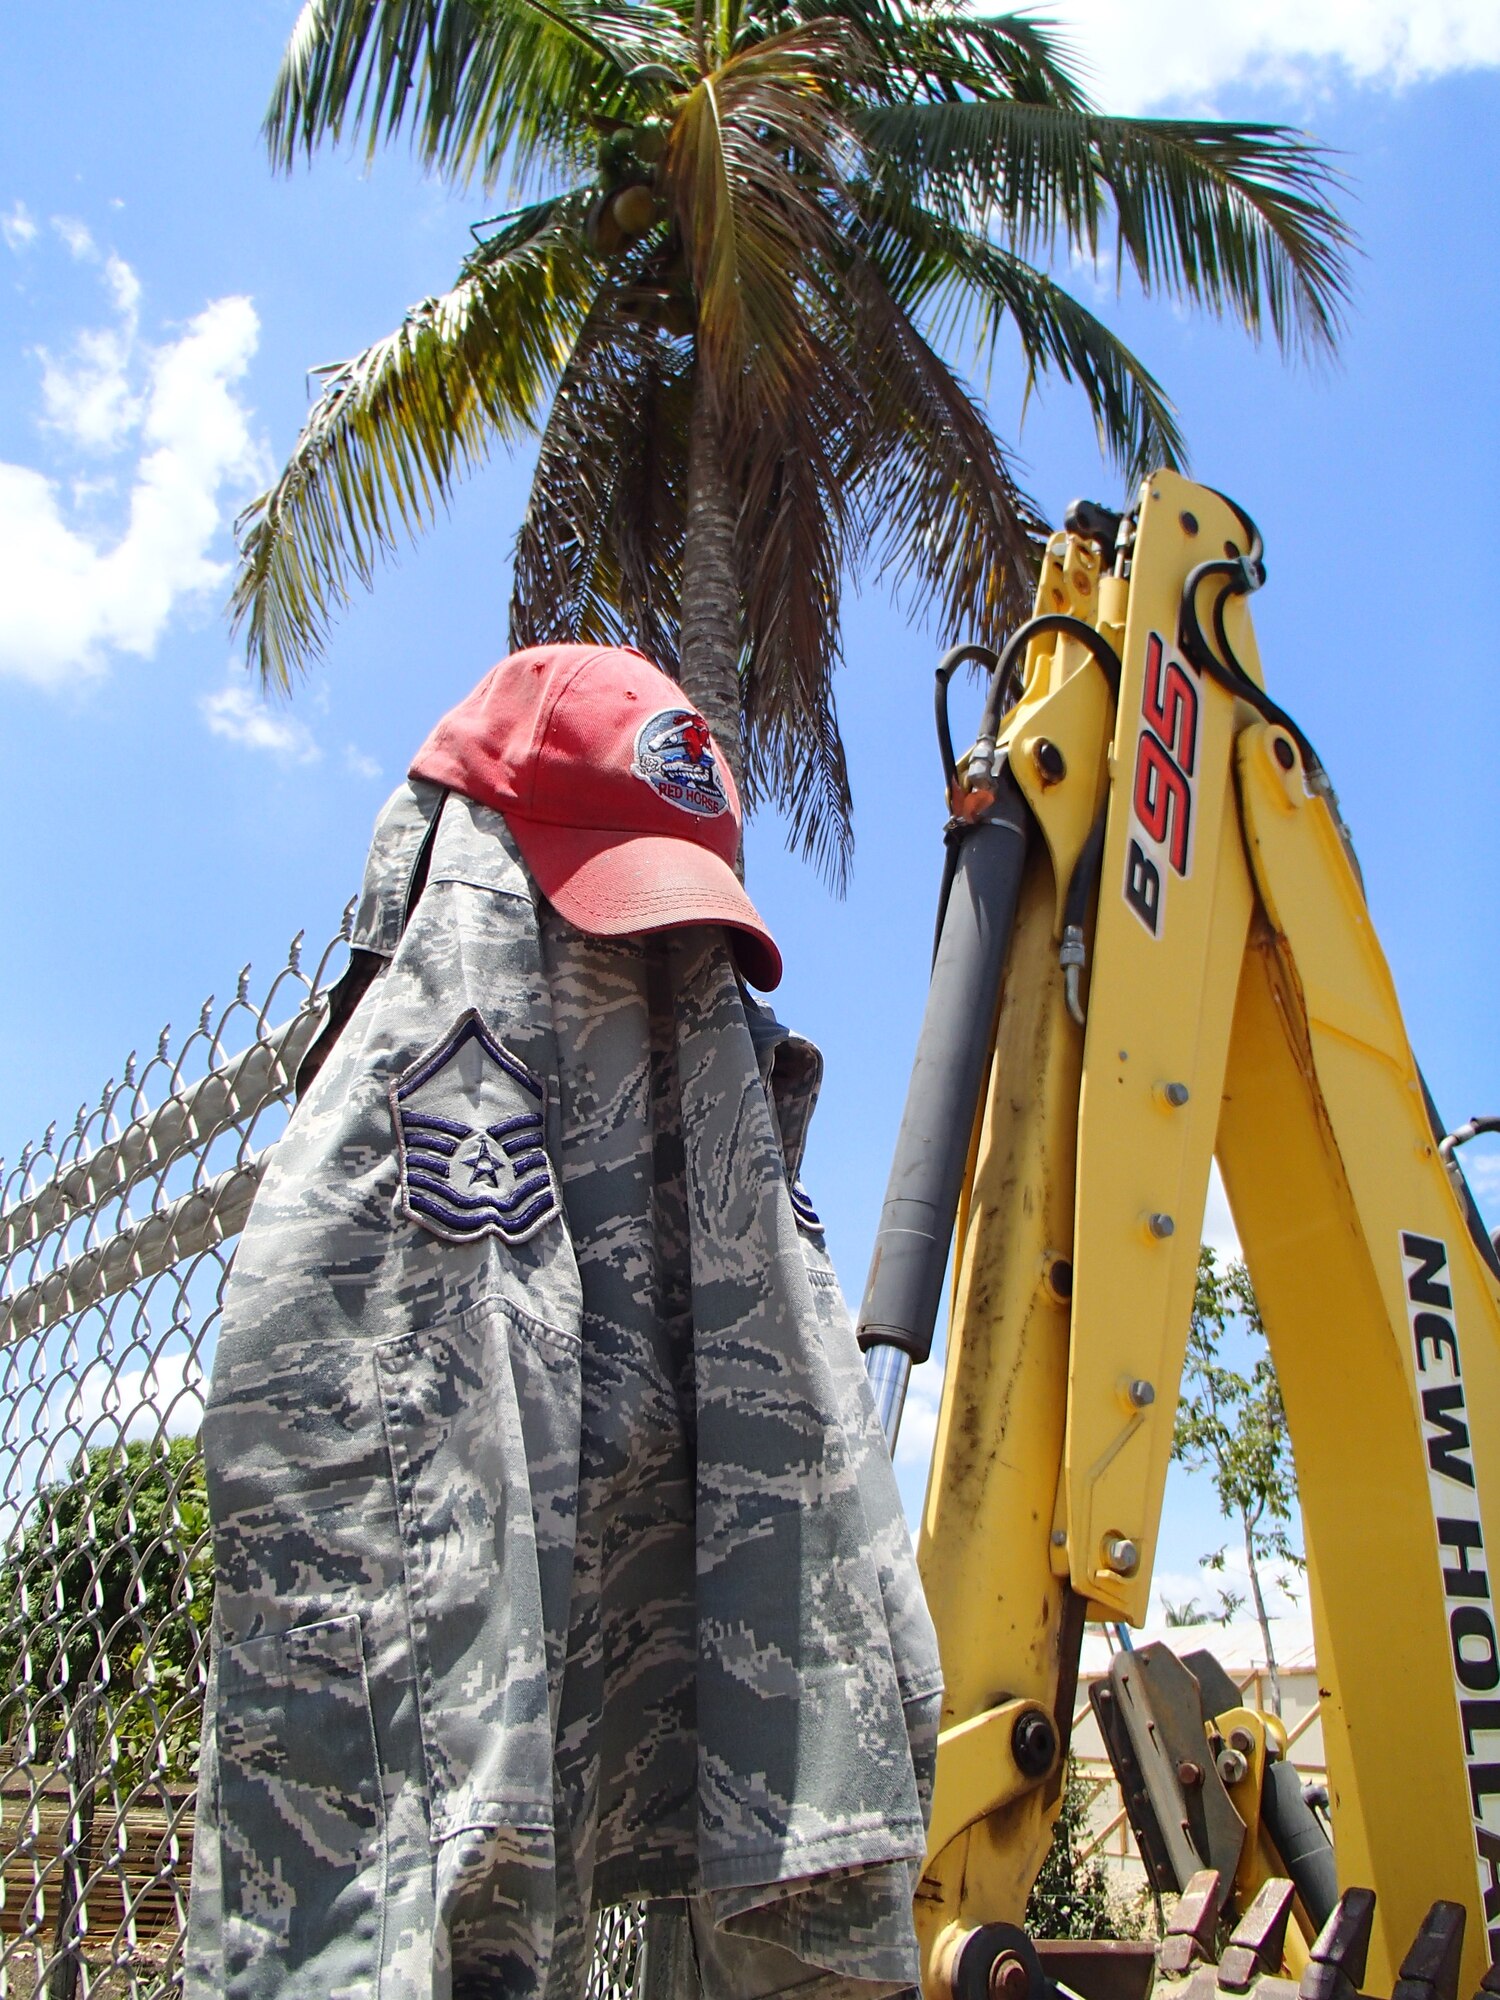 An Airman’s uniform blouse hangs on a fence at the construction site of Crooked Tree Government Primary School in Belize. (U.S. Air Force photo/Senior Master Sgt. Joel Shepherd)